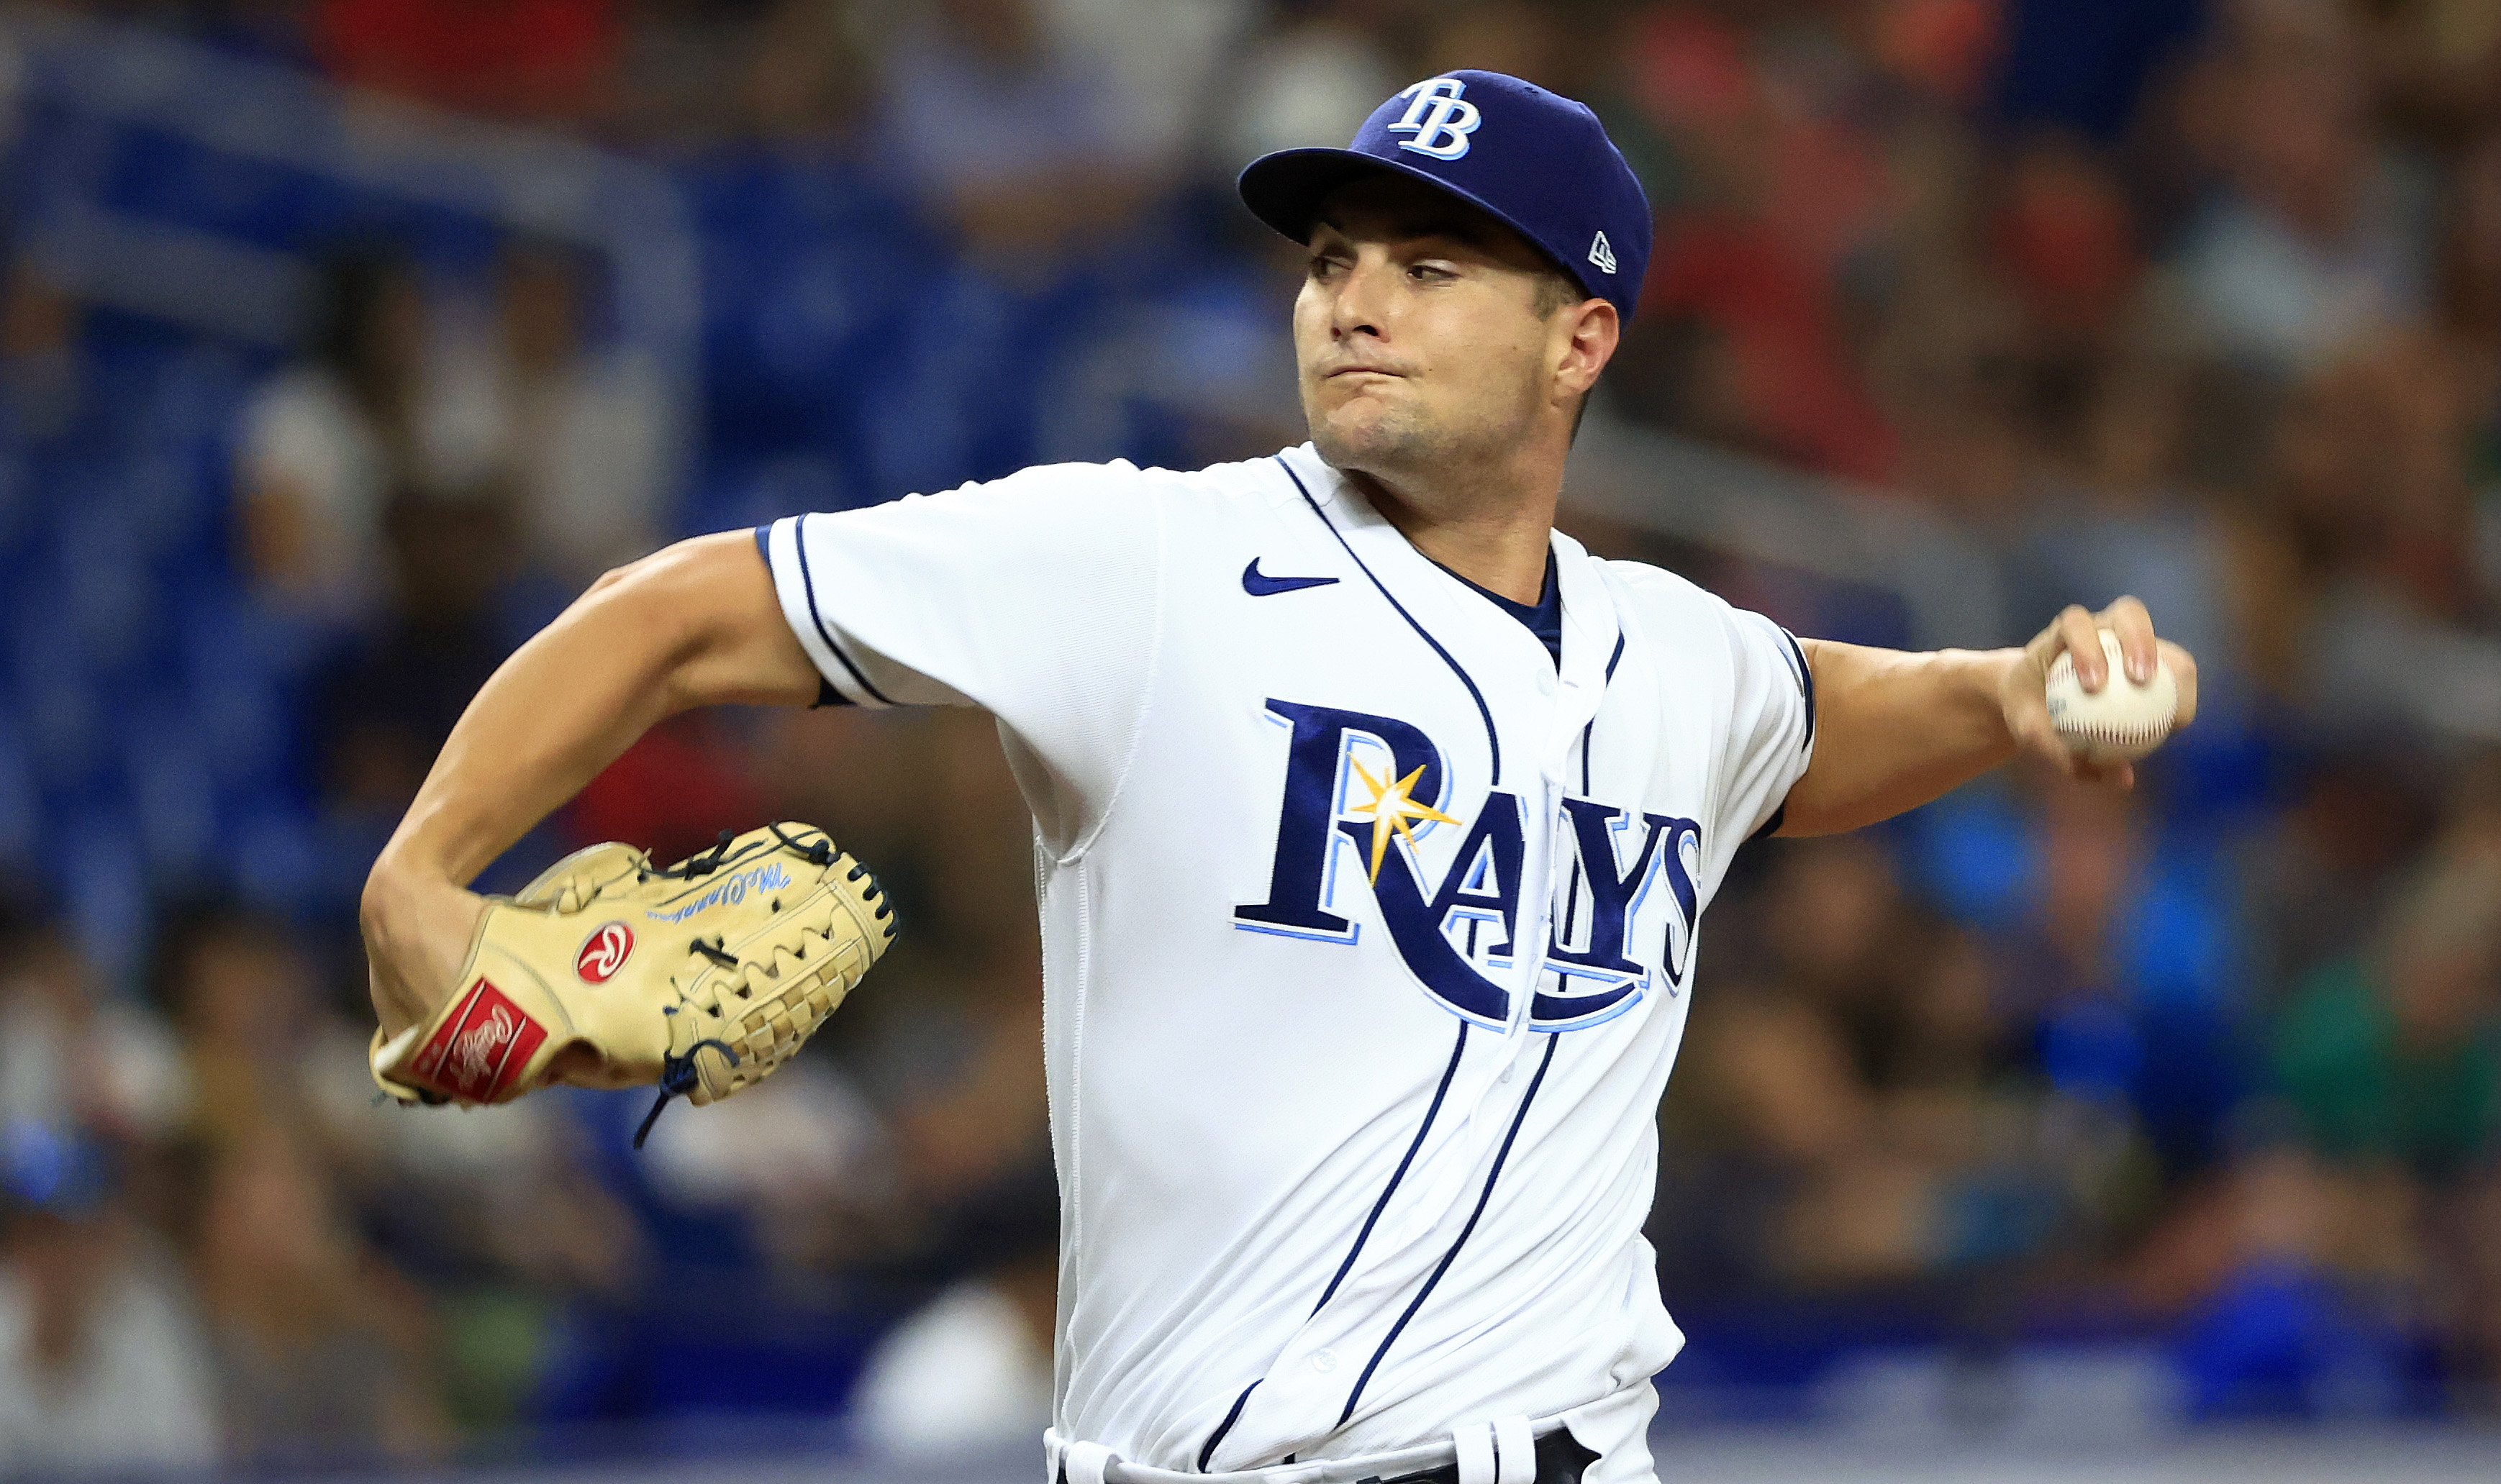 Shane McClanahan #18 of the Tampa Bay Rays pitches during a game against the Boston Red Sox at Tropicana Field on July 12, 2022 in St Petersburg, Florida.  &nbsp;  